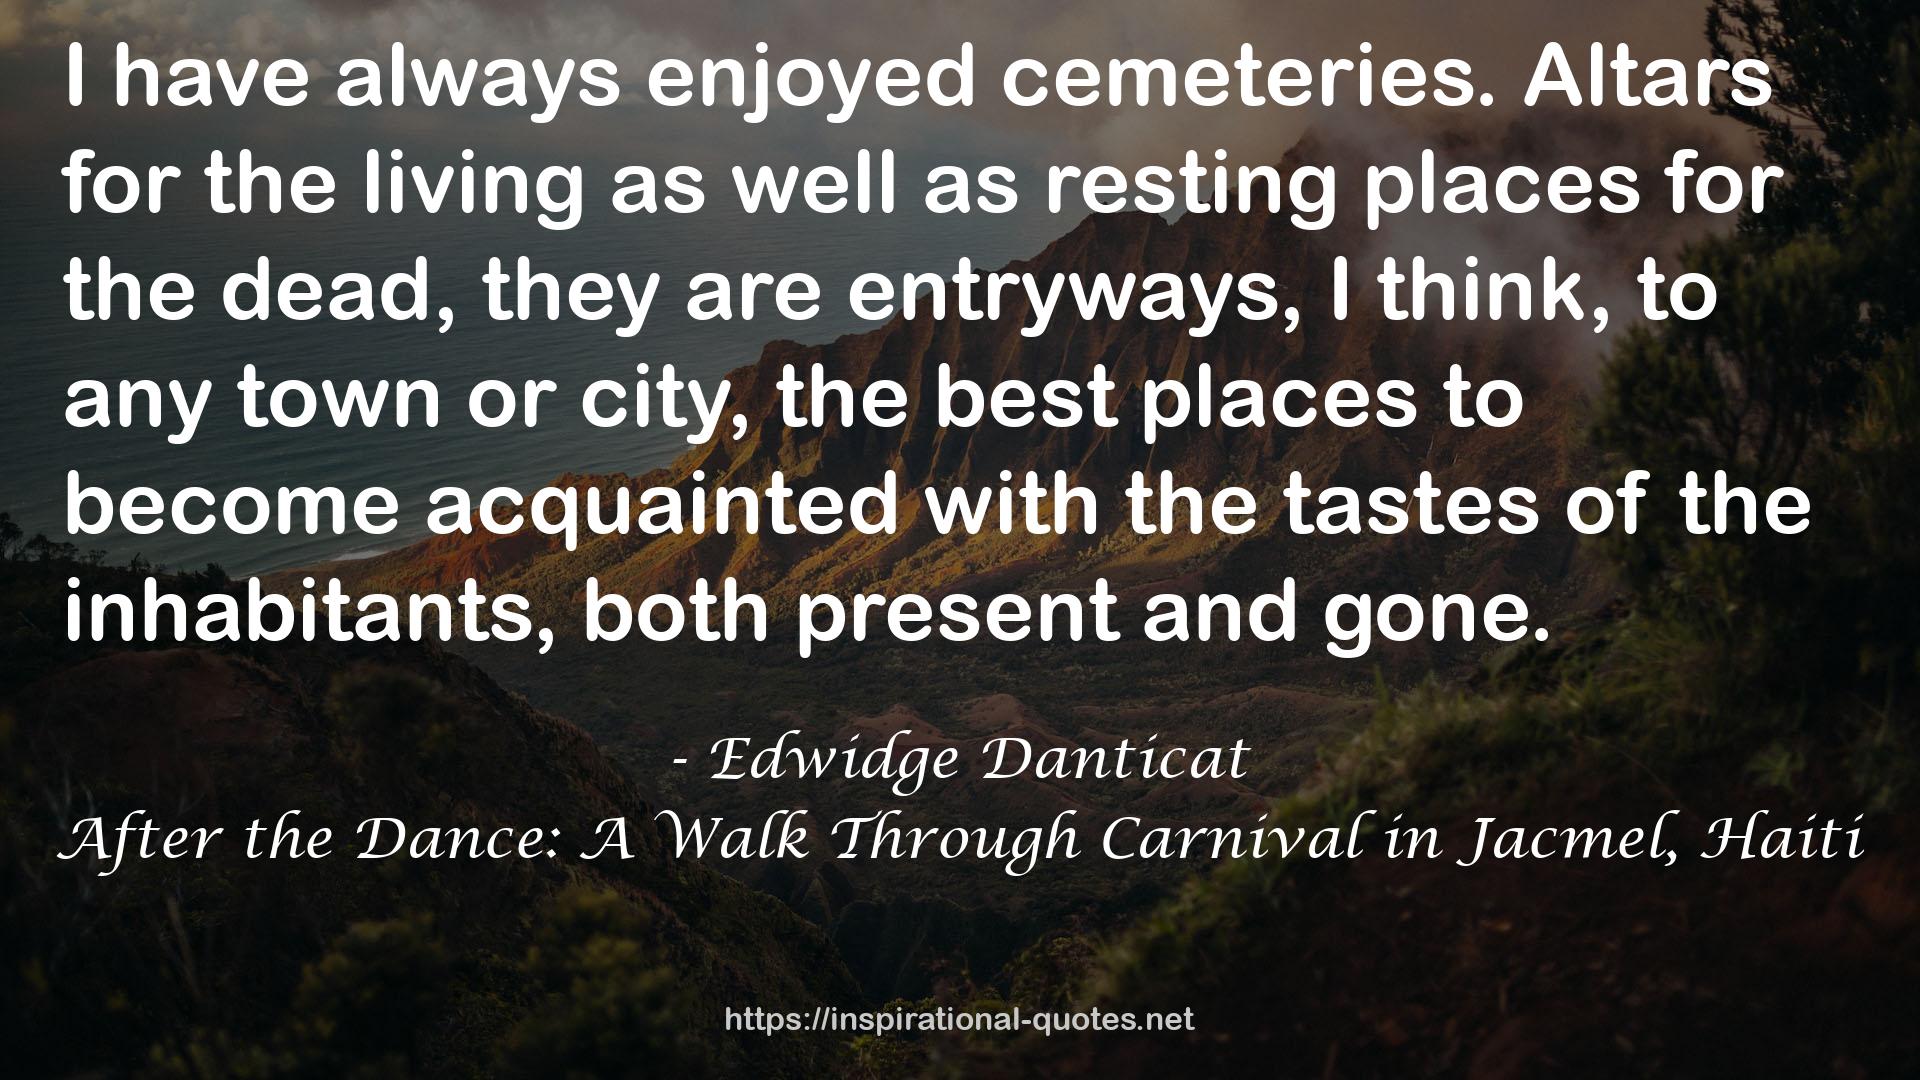 After the Dance: A Walk Through Carnival in Jacmel, Haiti QUOTES